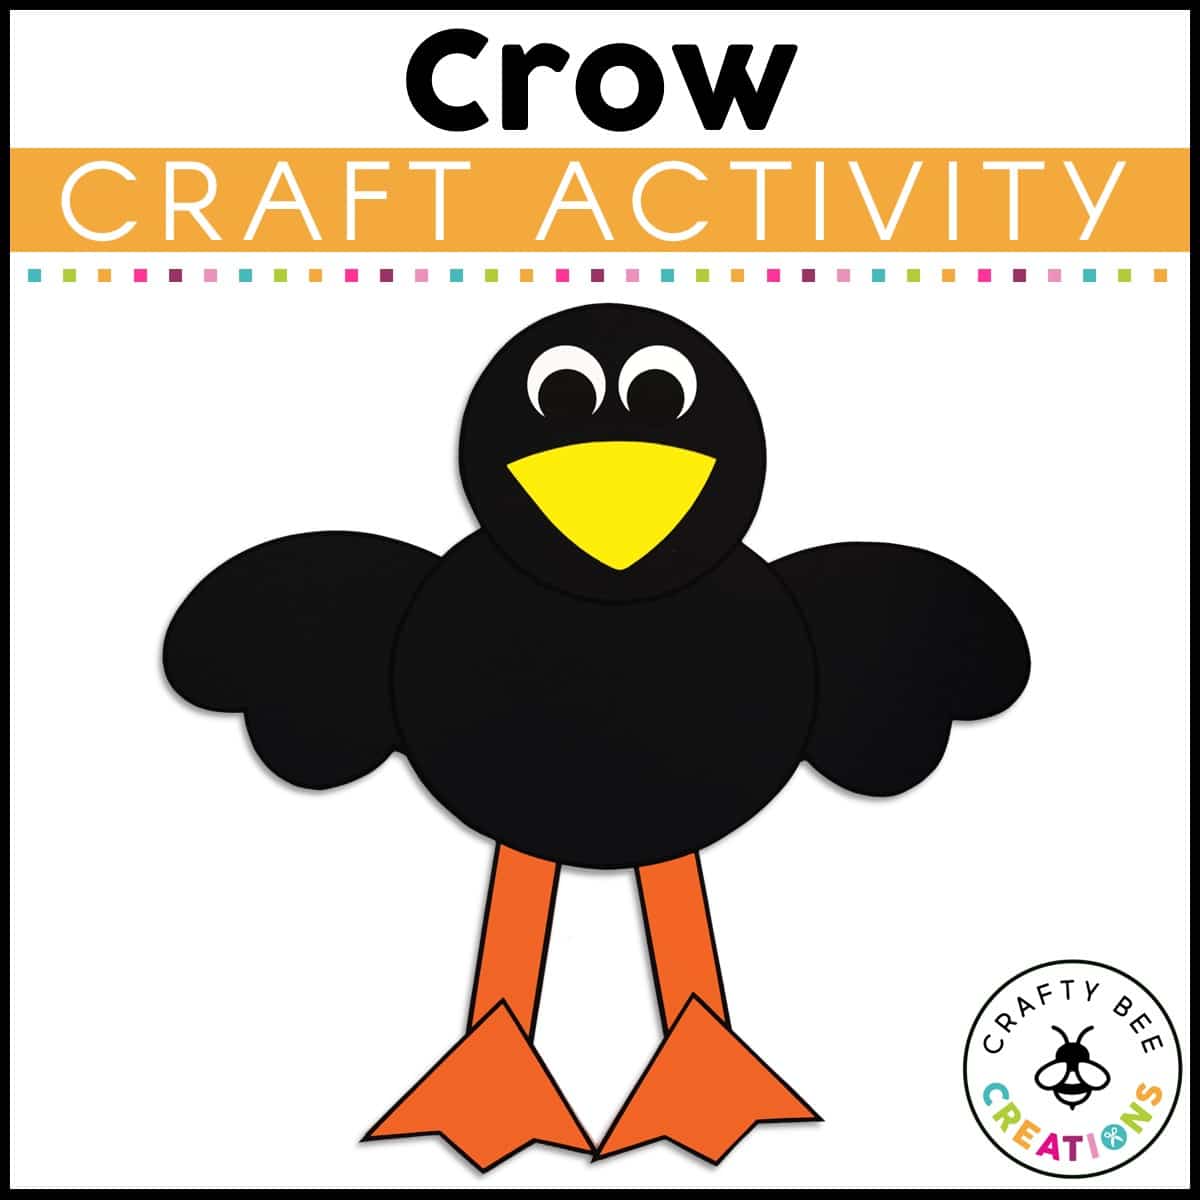 Felt Play Shapes - Things to Make and Do, Crafts and Activities for Kids -  The Crafty Crow